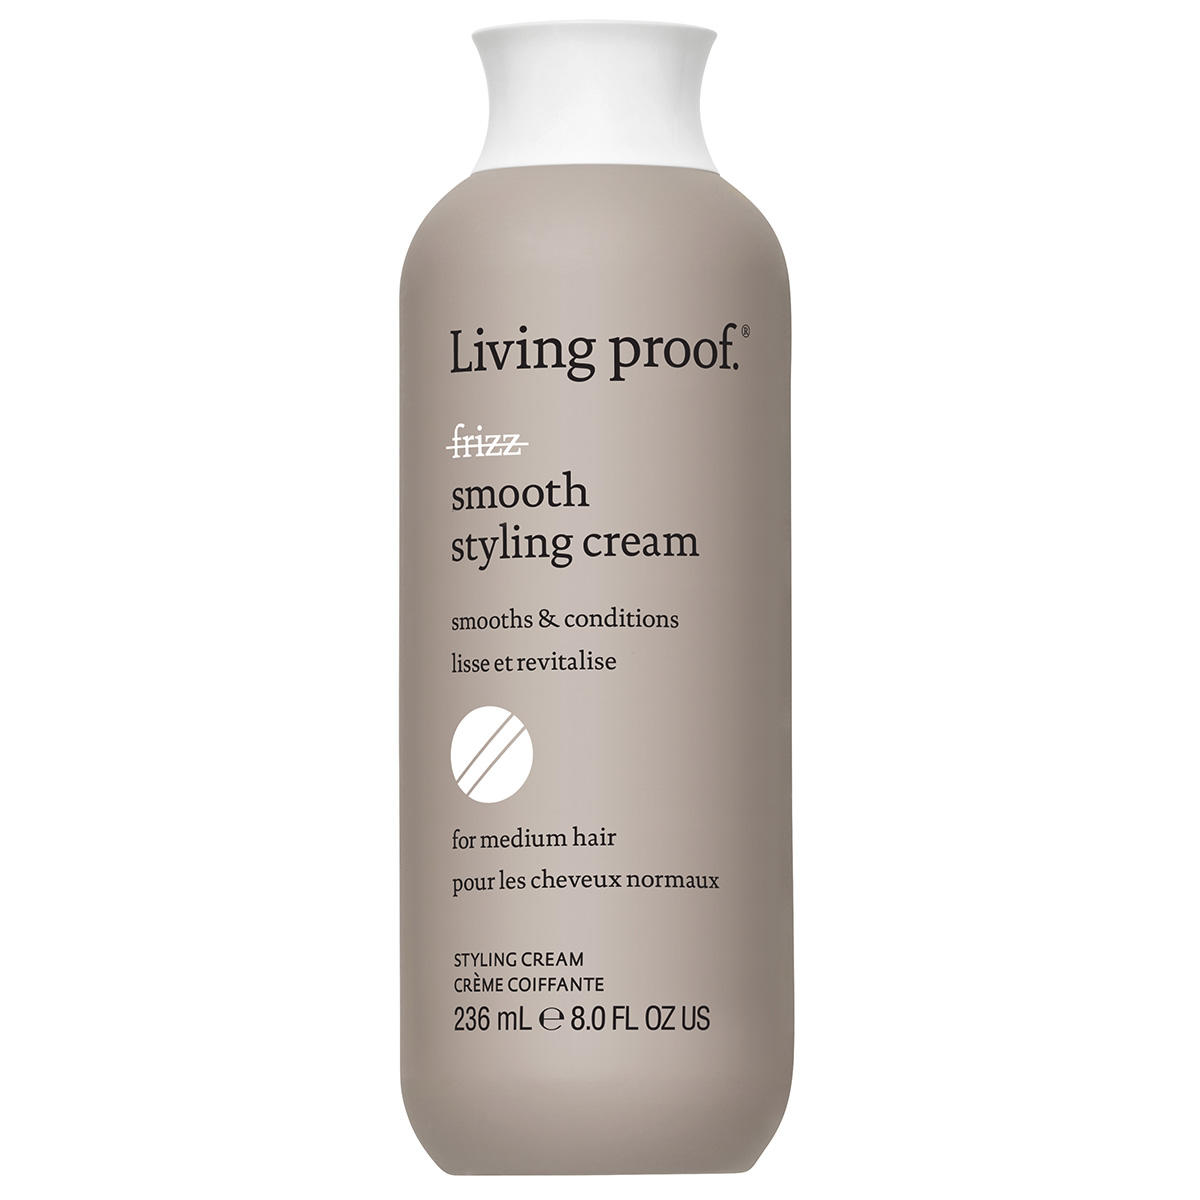 Living proof no frizz Smooth Styling Cream 236 ml - 1